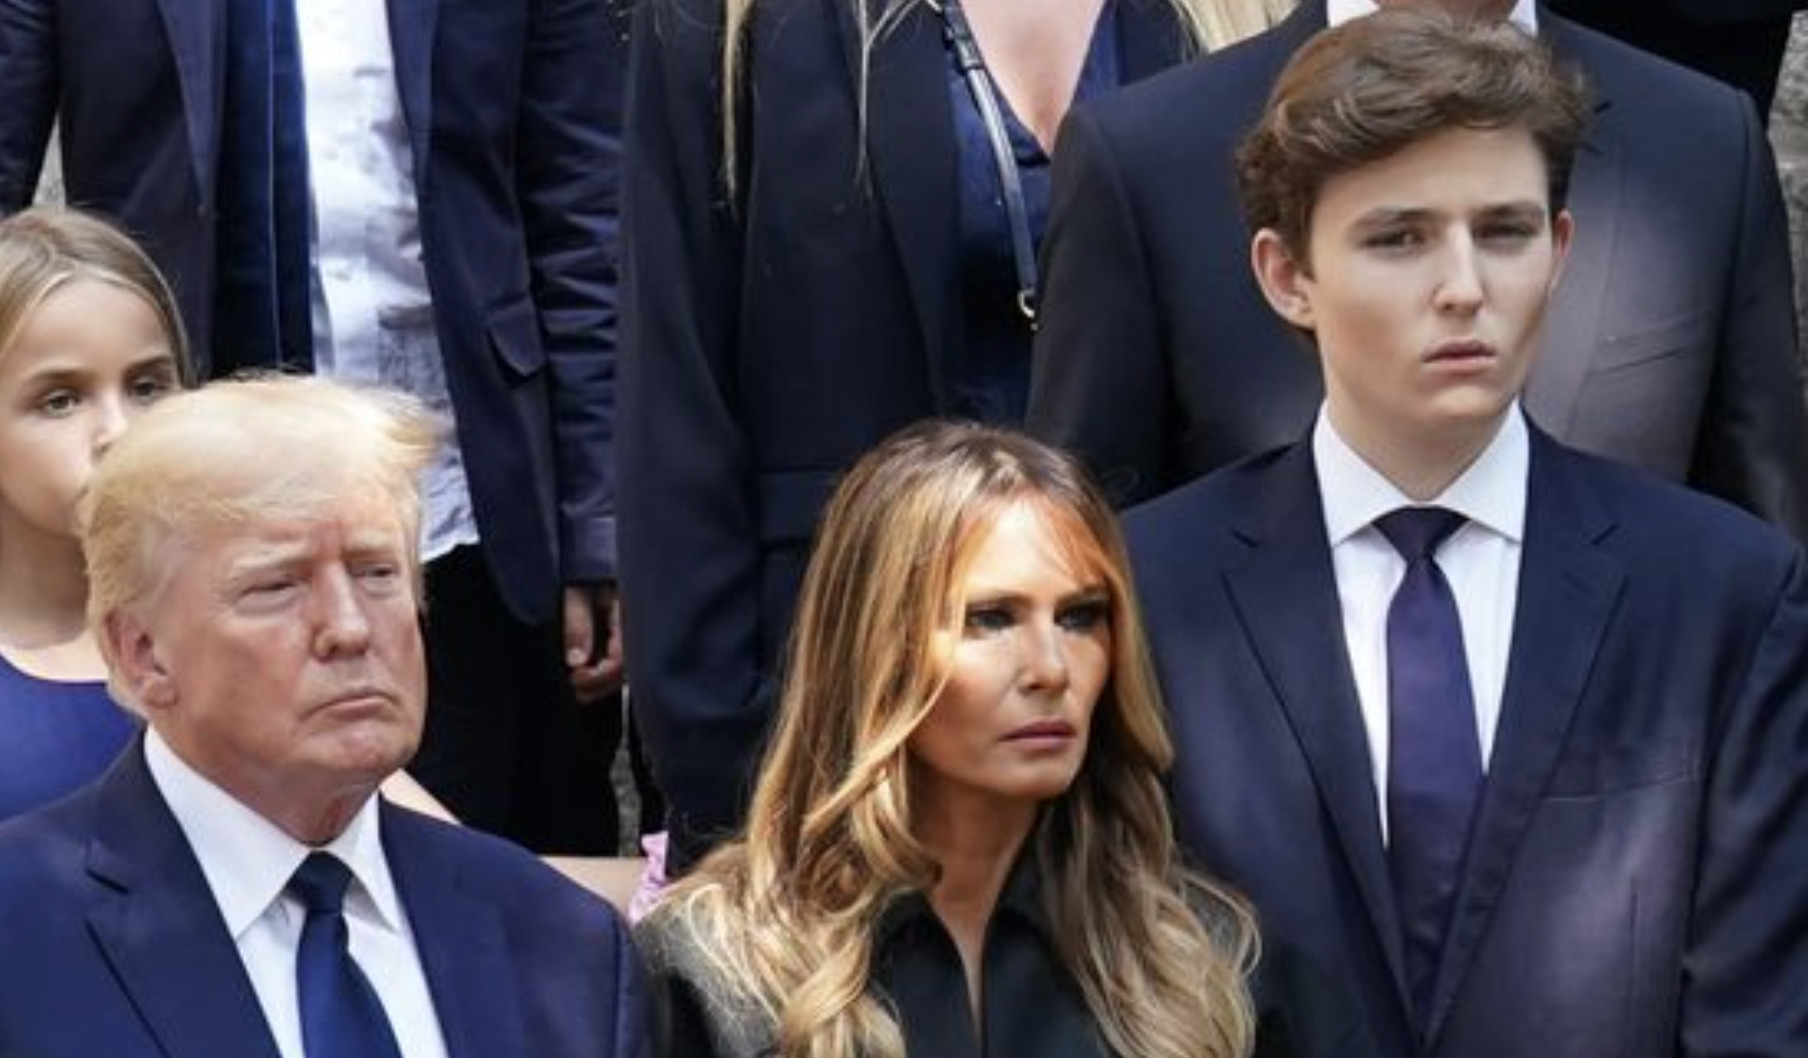 Trump Doesn't Get Along With Son Barron and Is Extremely Jealous of Barron's Height Because